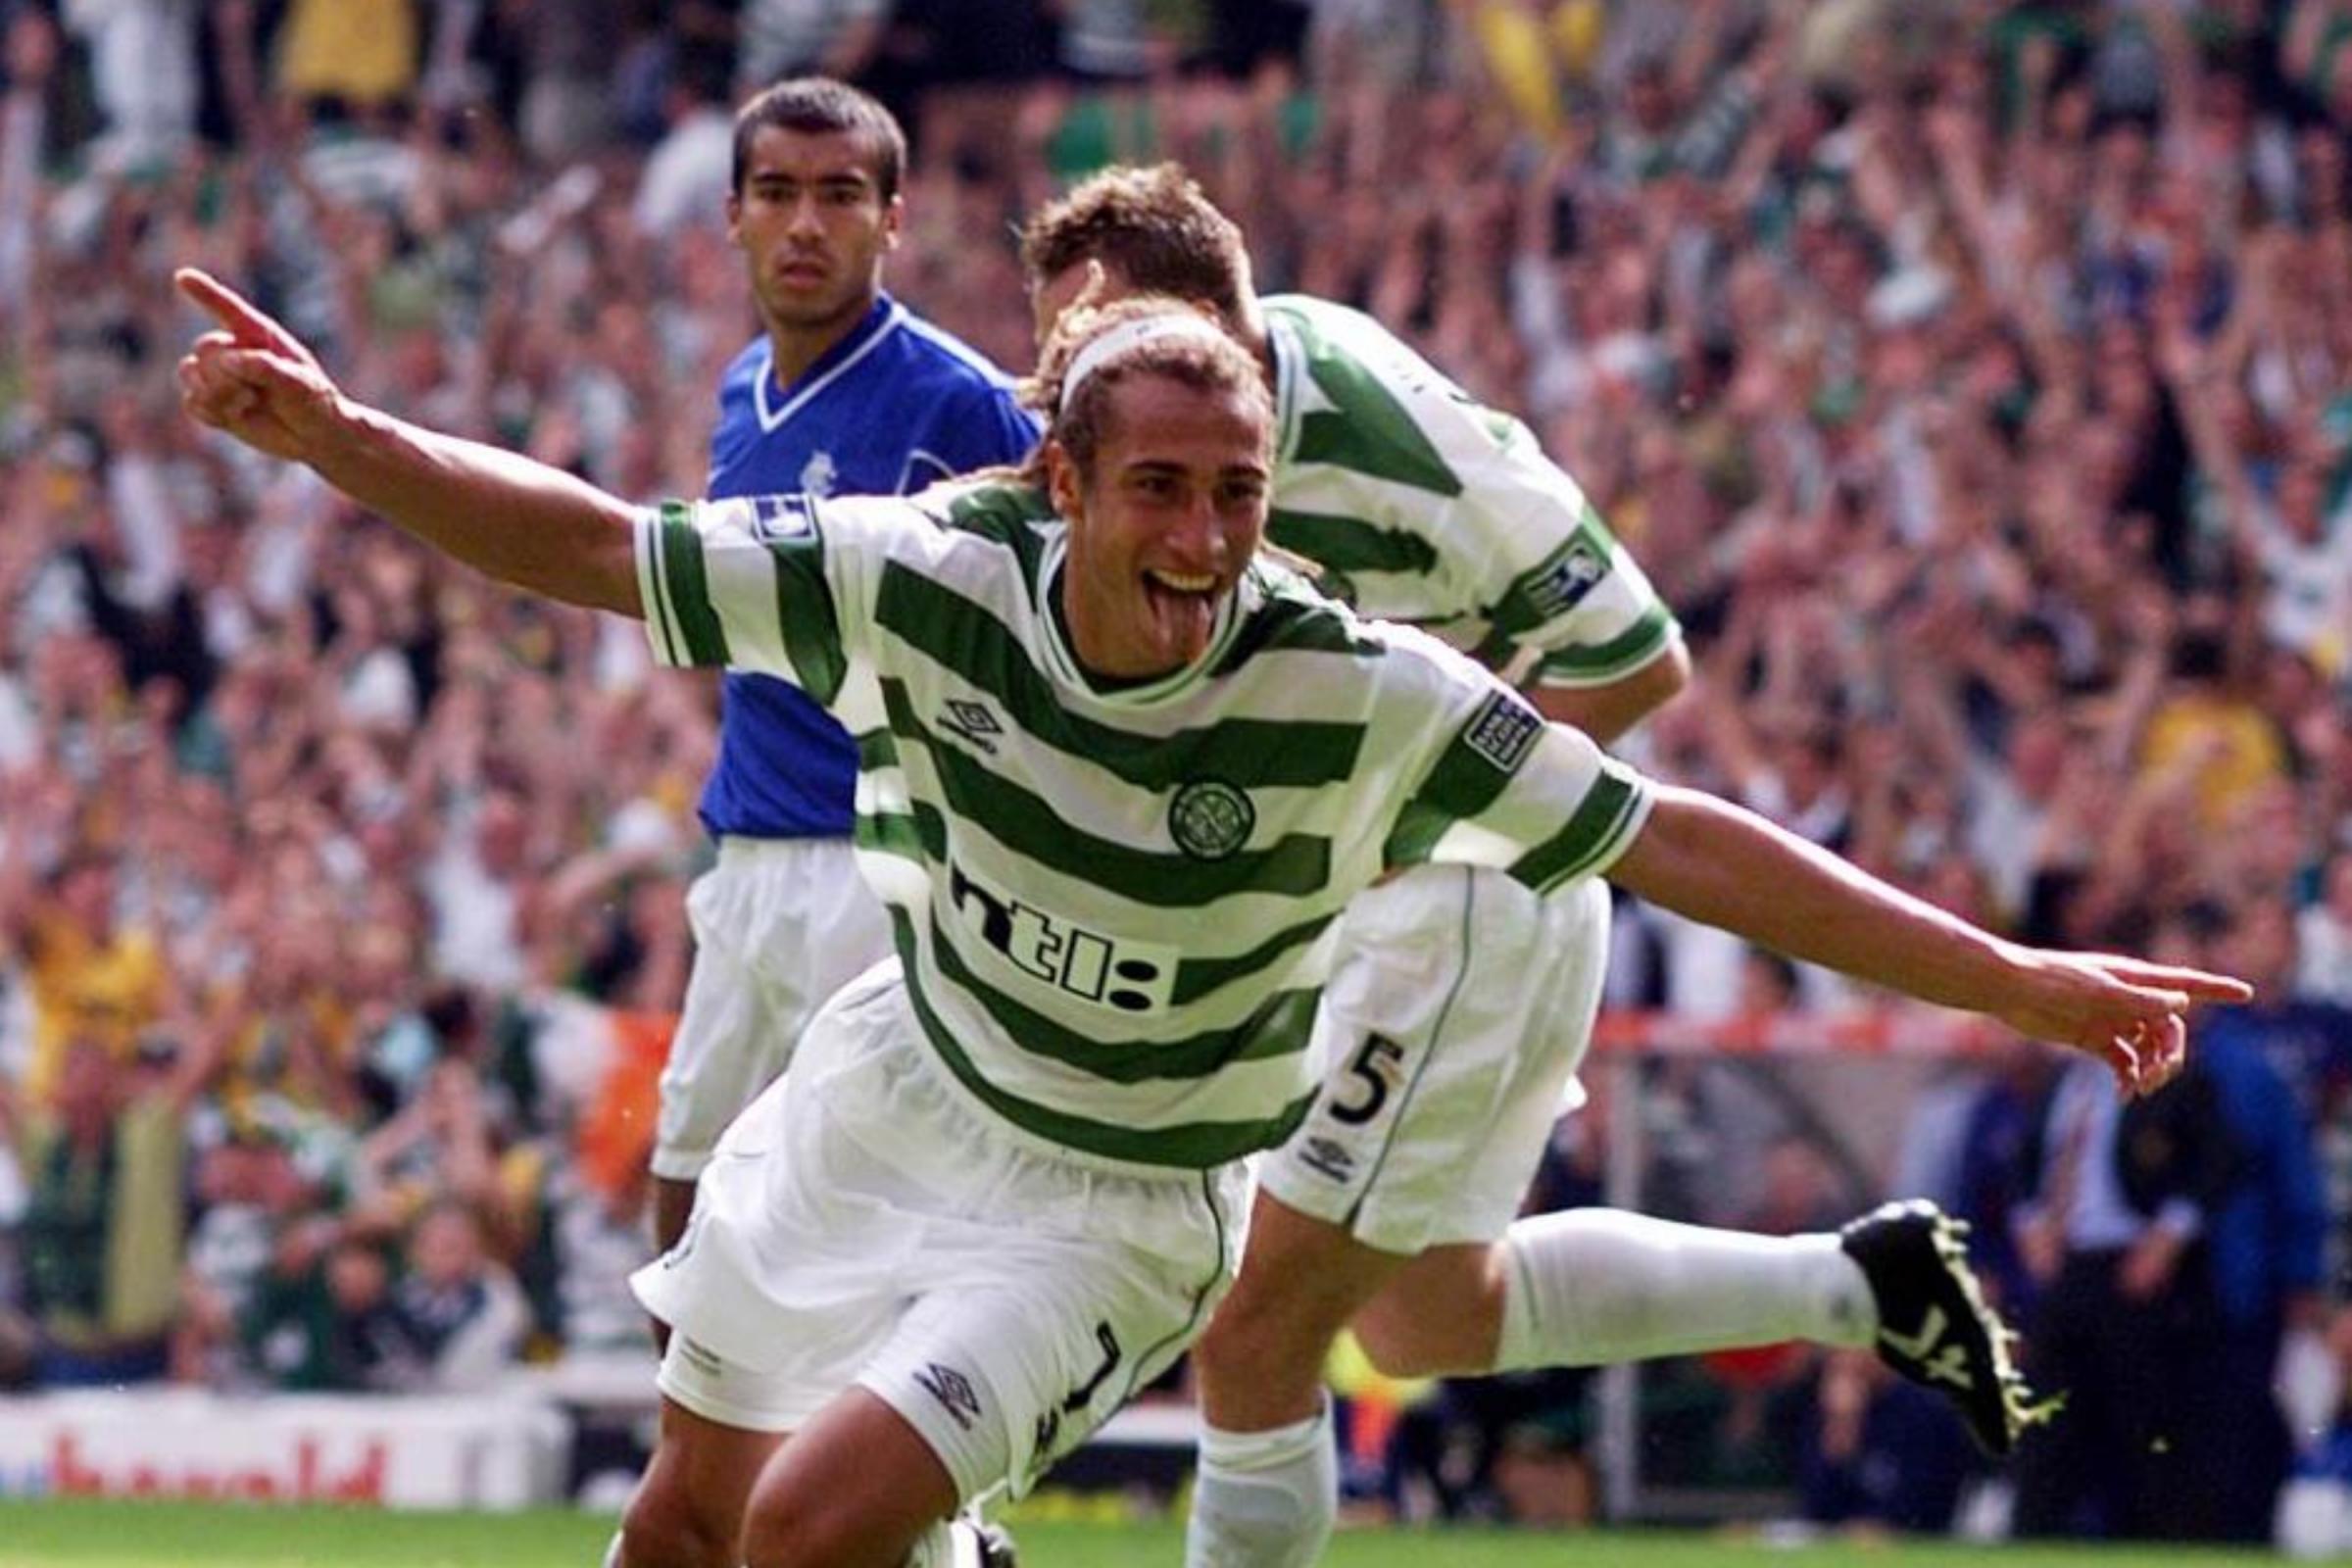 Henrik Larsson: The Magnificent 7 or the King of Kings? | Celtic Way